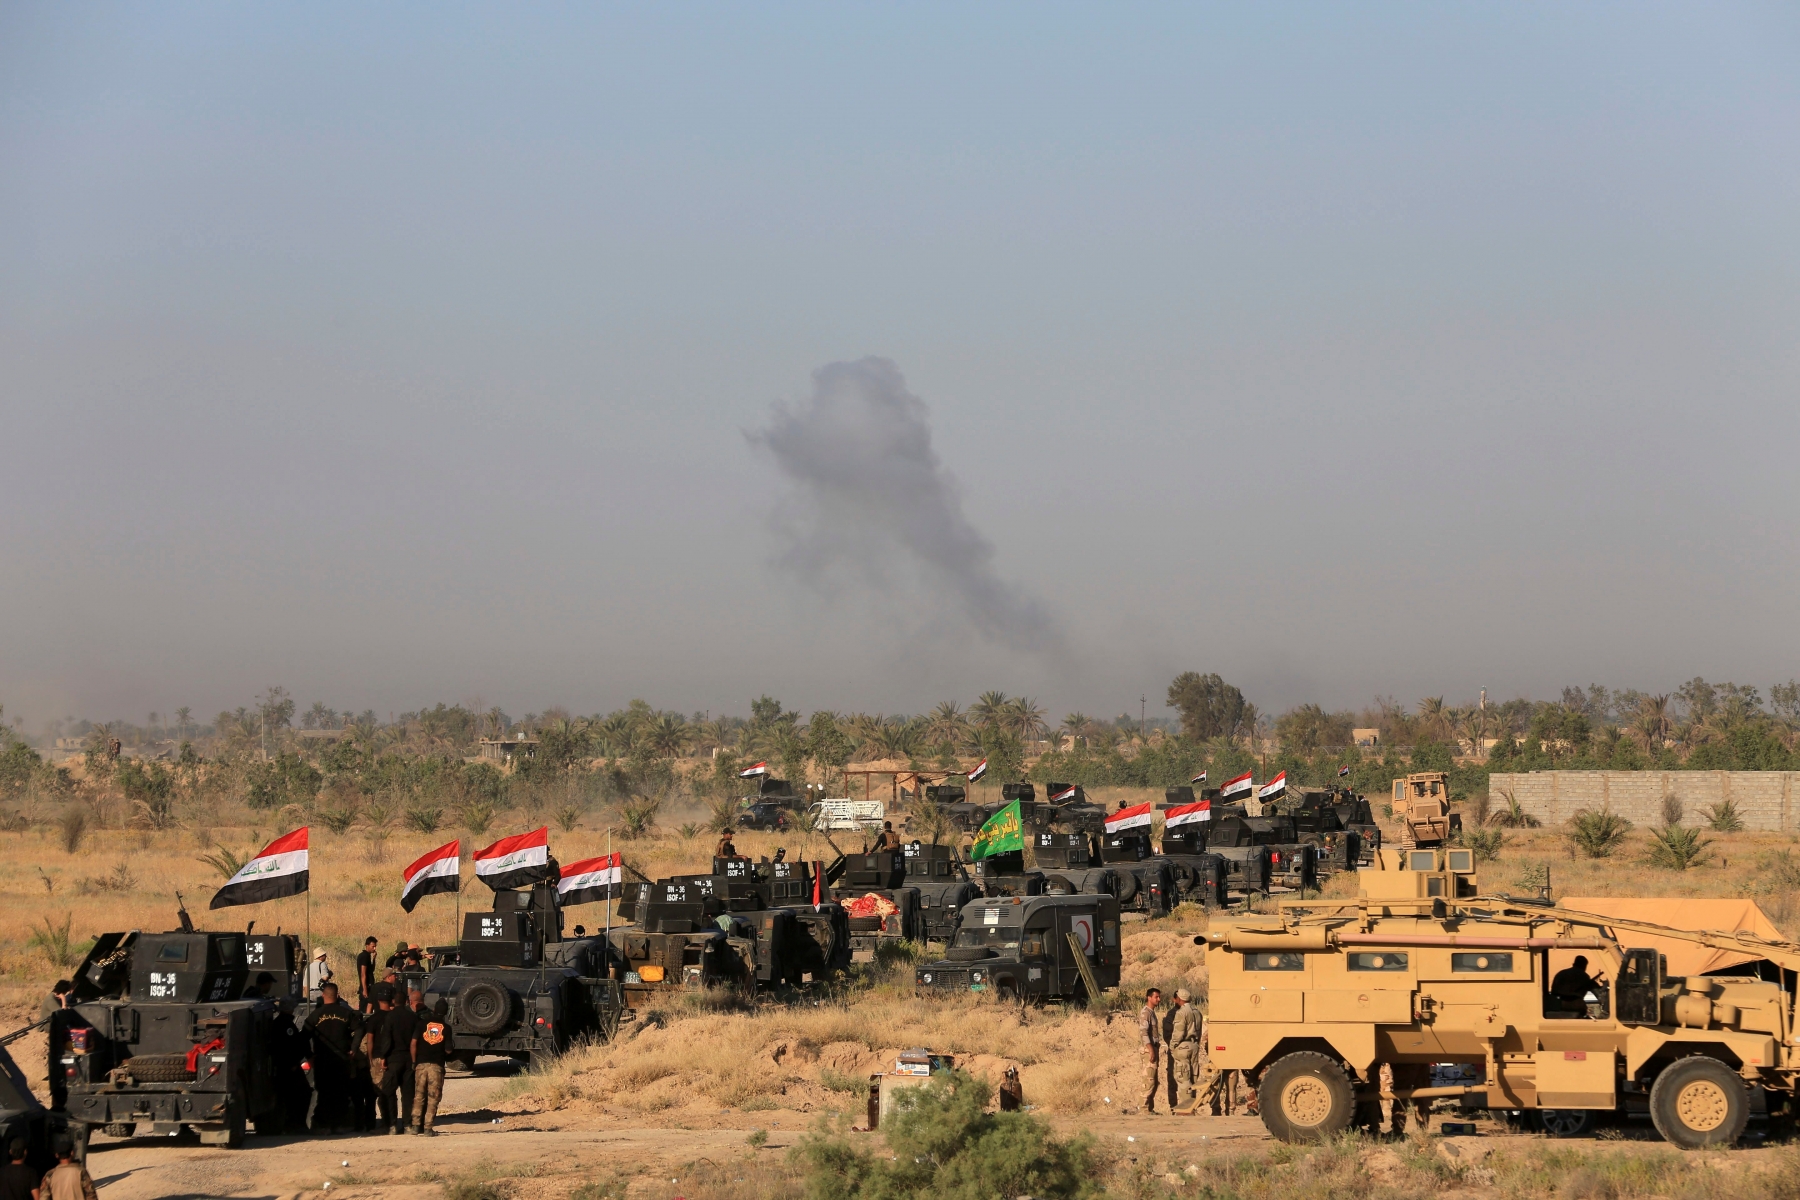 Iraqi military forces prepare for an offensive into Fallujah to retake the city from Islamic State militants in Iraq, Monday, May 30, 2016. An Iraqi special forces commander says they have started pushing into Fallujah as part of the ongoing operation to oust Islamic State militants from this city west of Baghdad. (AP Photo/Khalid Mohammed) APTOPIX Mideast Iraq Islamic State